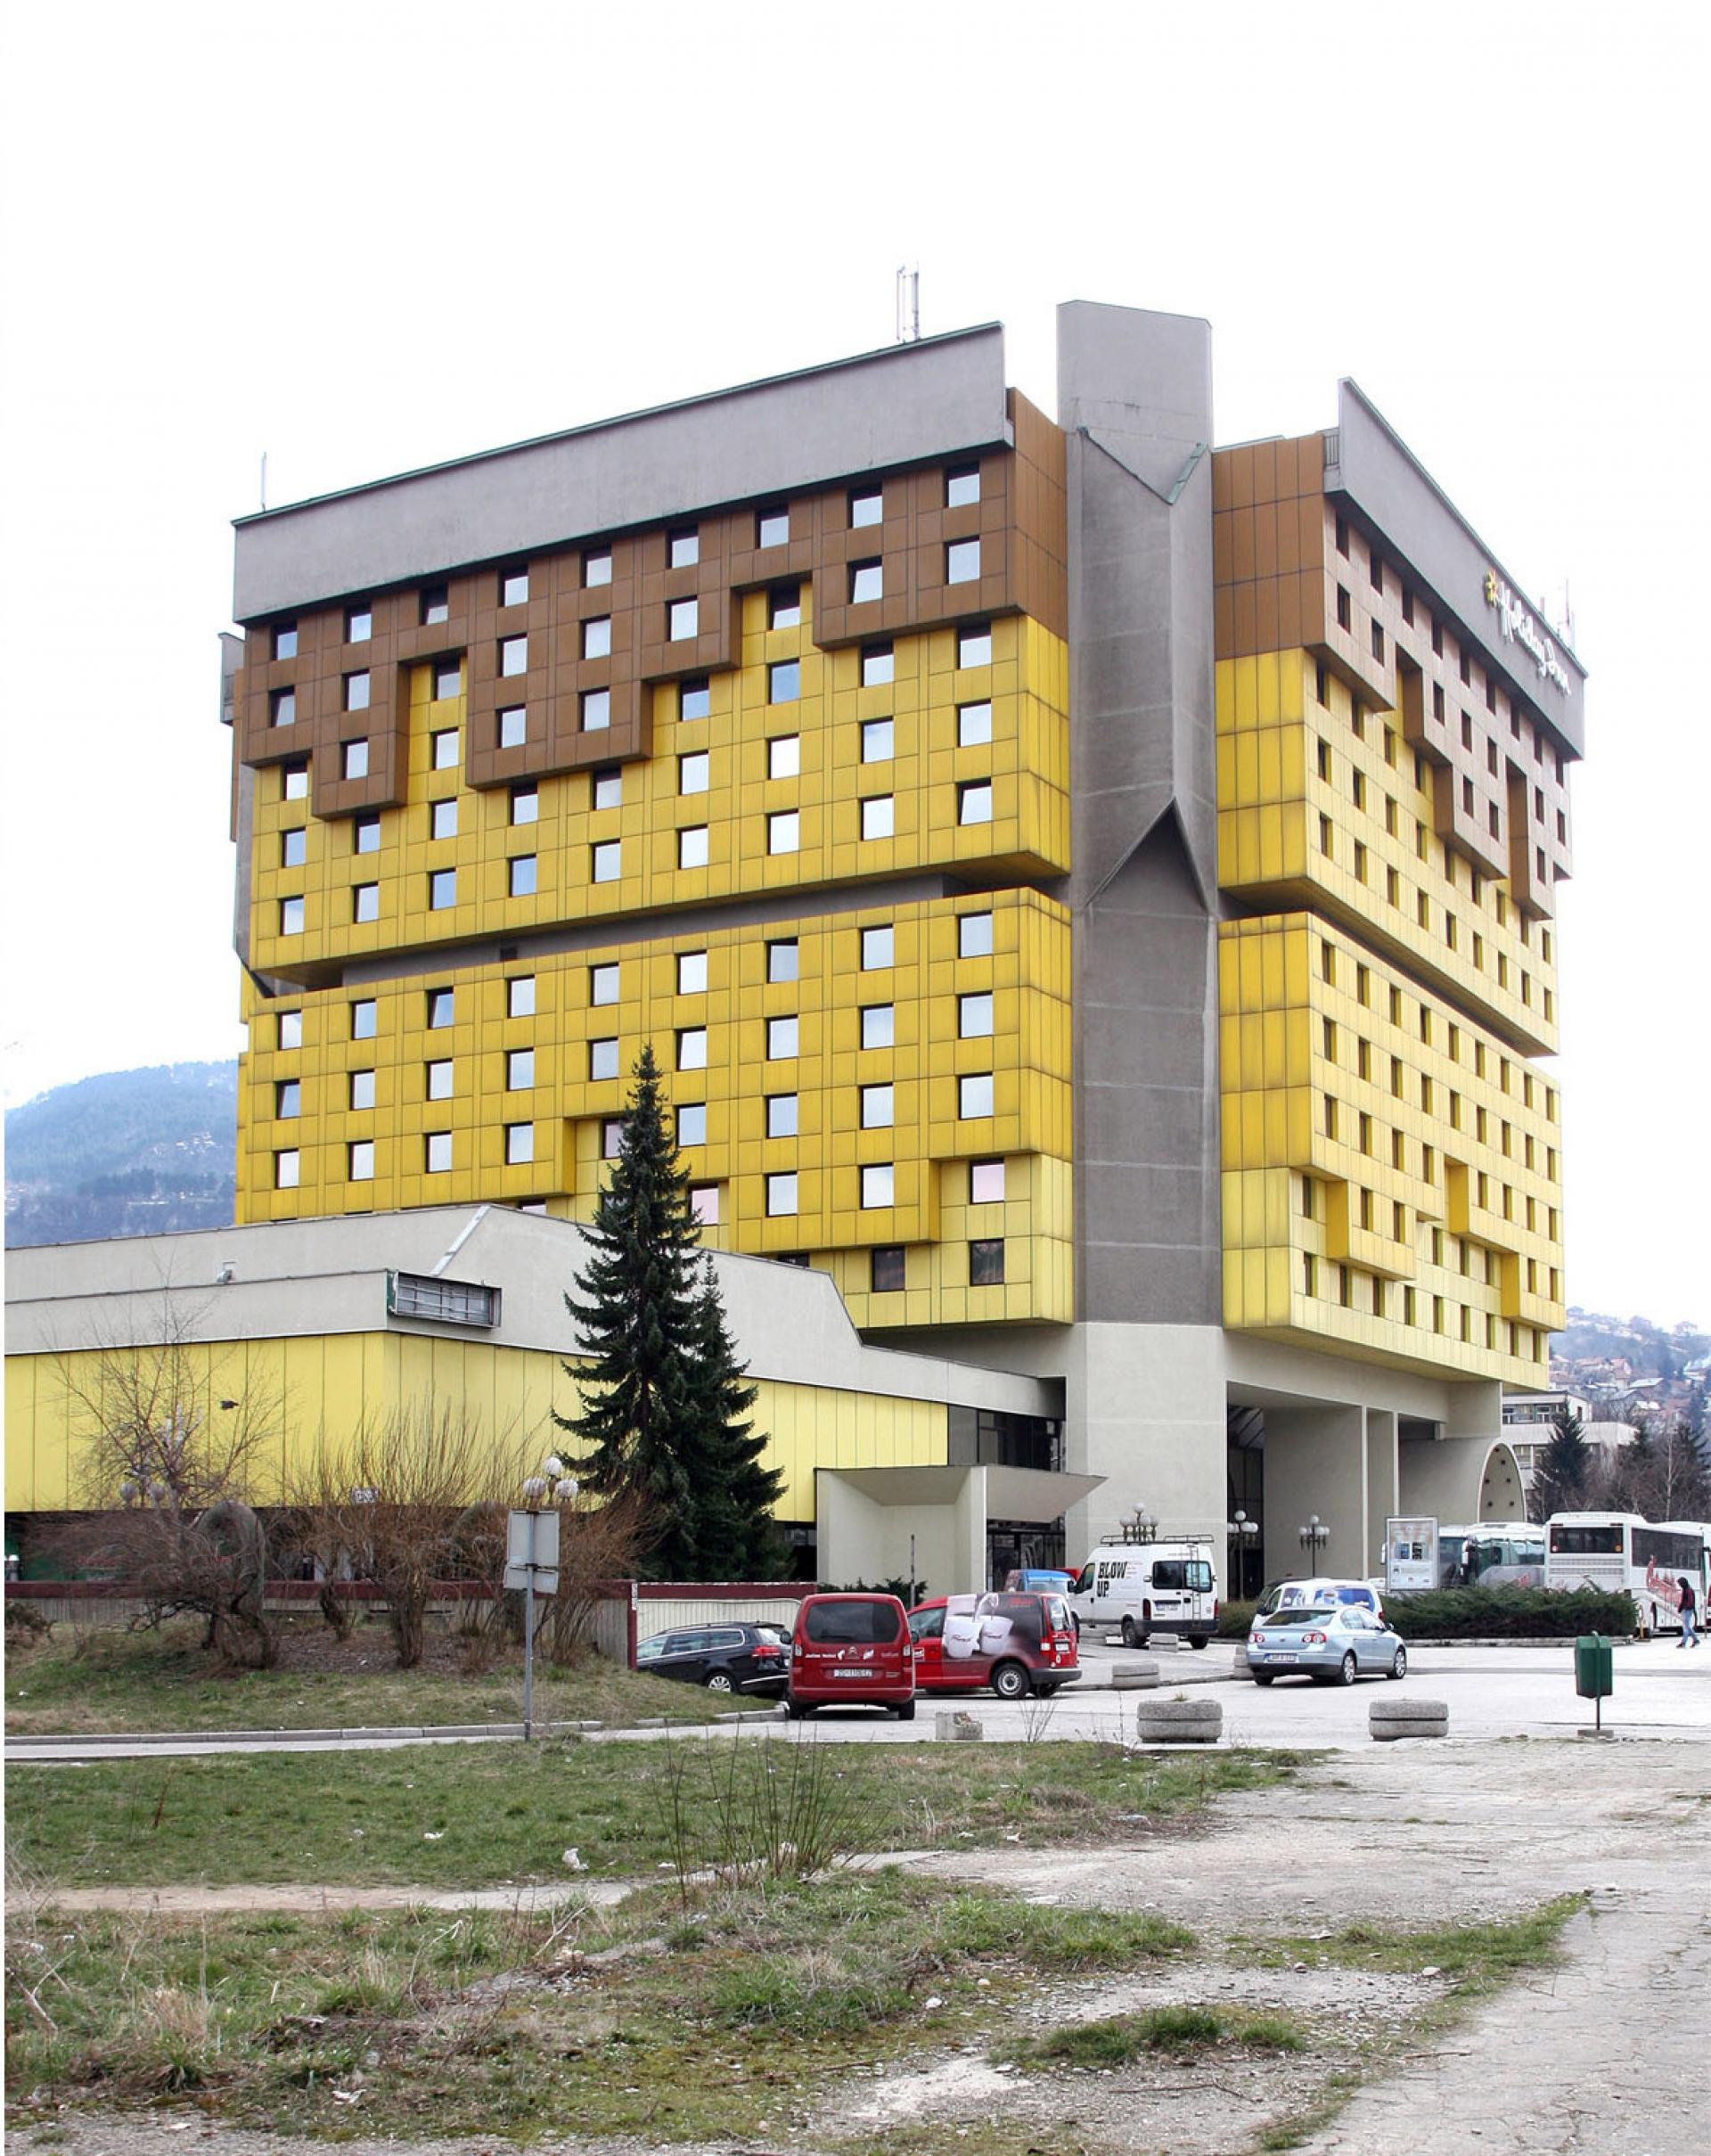 Hotel Holliday Inn (1983) was a war residence for foreign reporters. | Photo by Zoran Kanlić (2015)